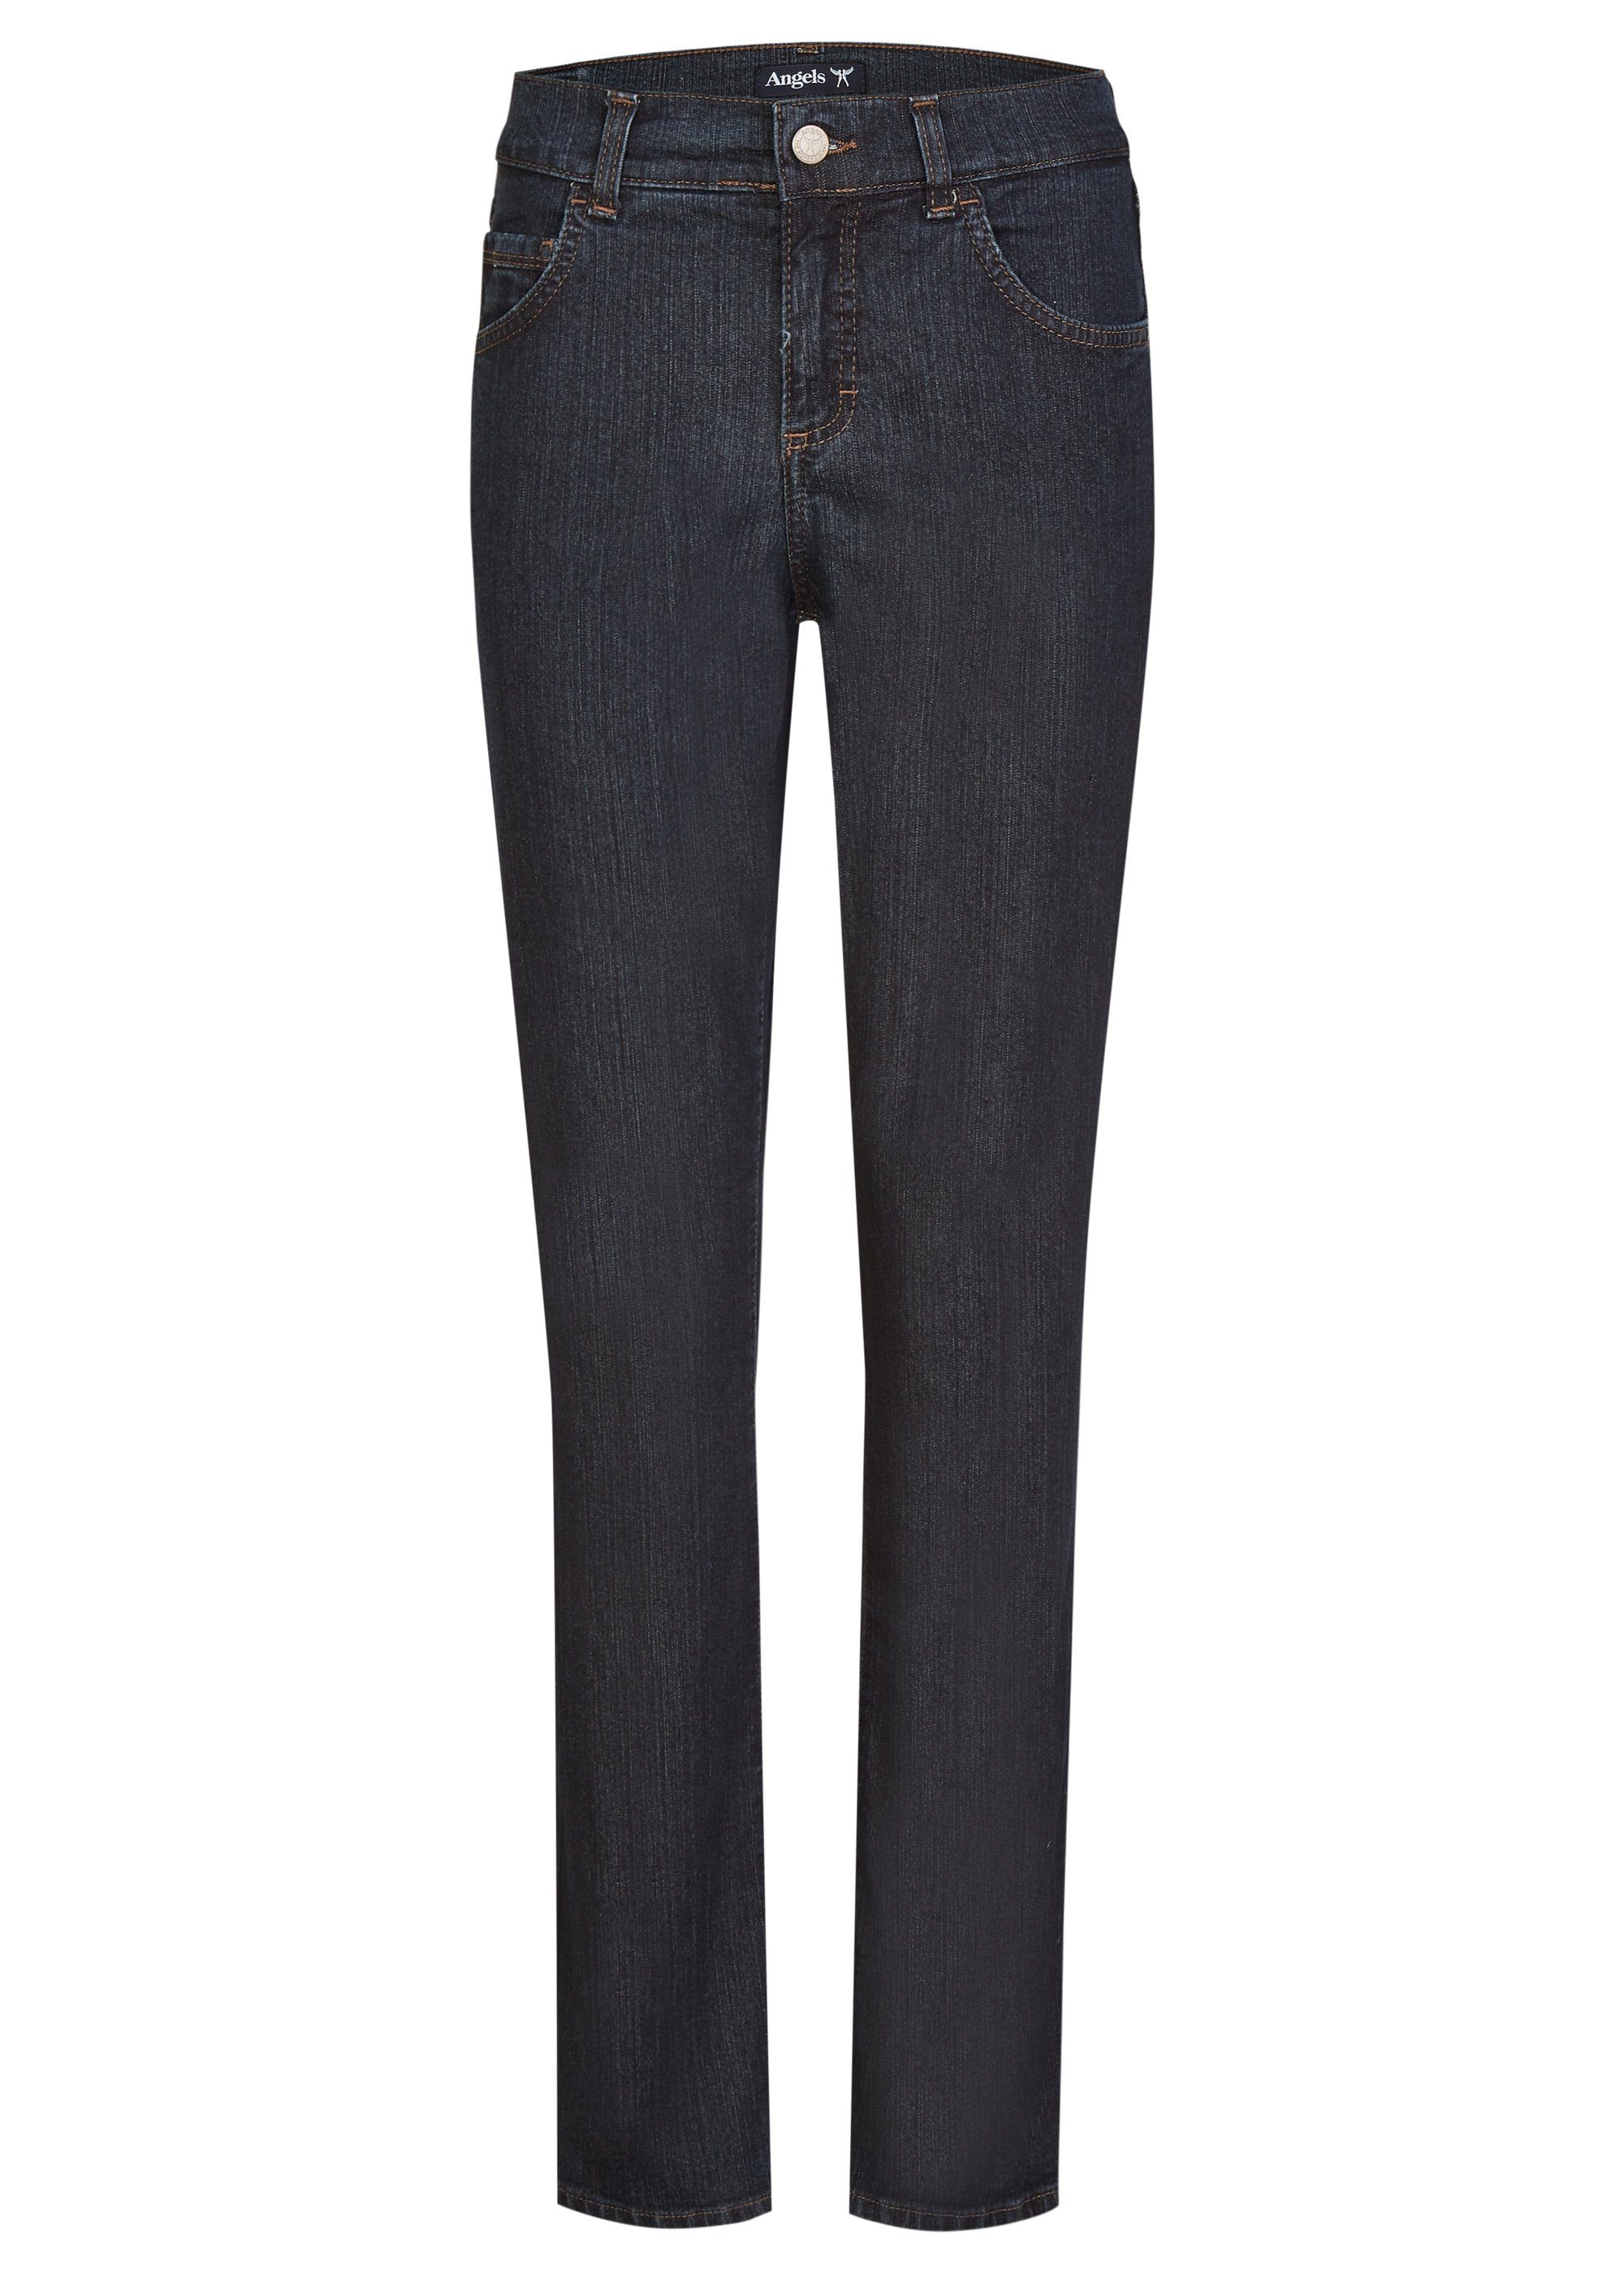 ANGELS Stretch-Jeans ANGELS JEANS DOLLY midnight blue 53 80.30